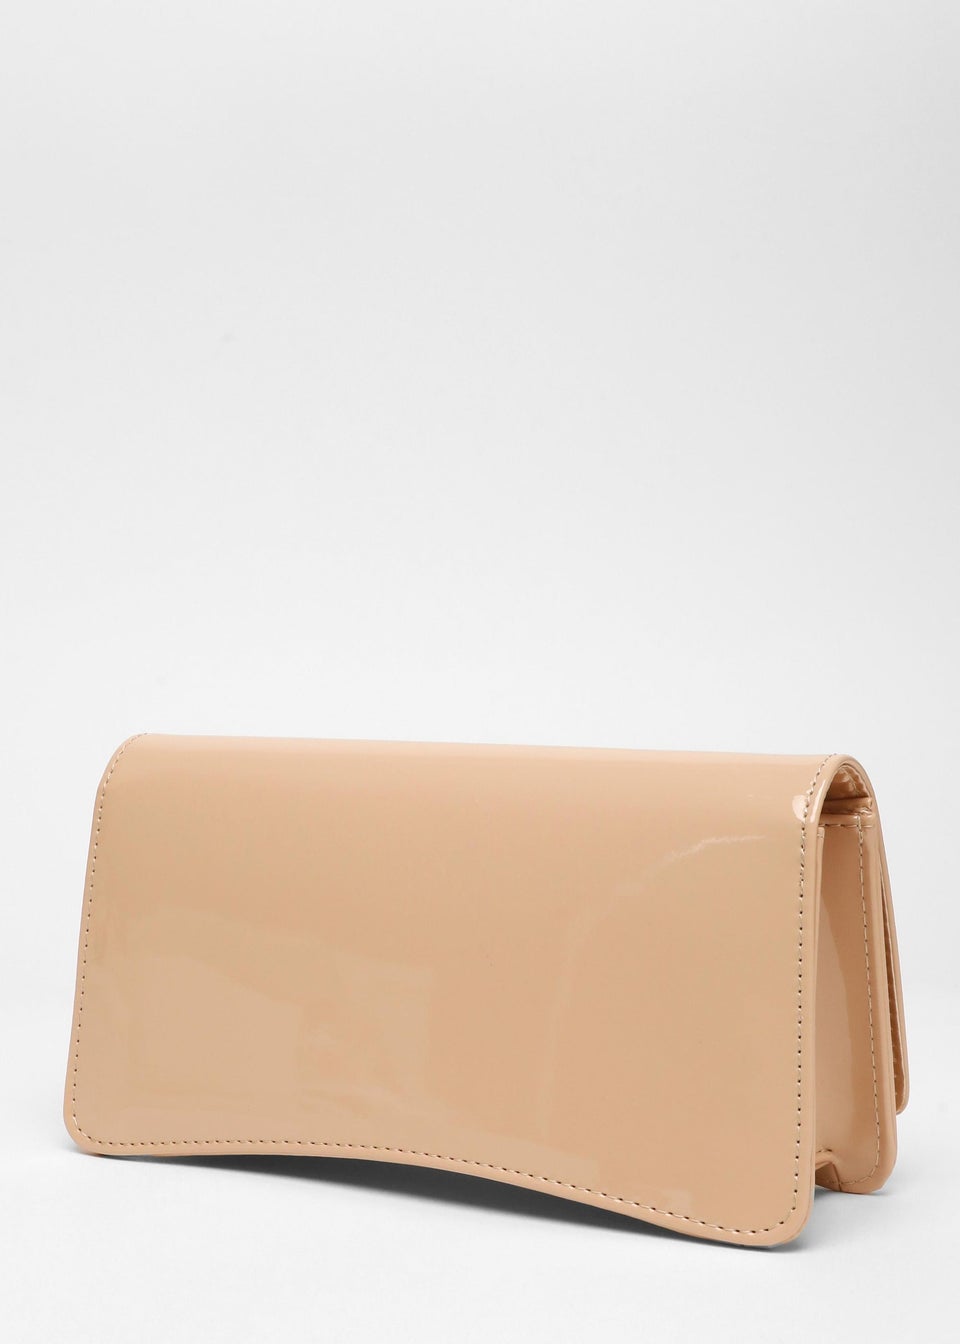 Quiz Natural Patent Faux Leather Curved Clutch Bag